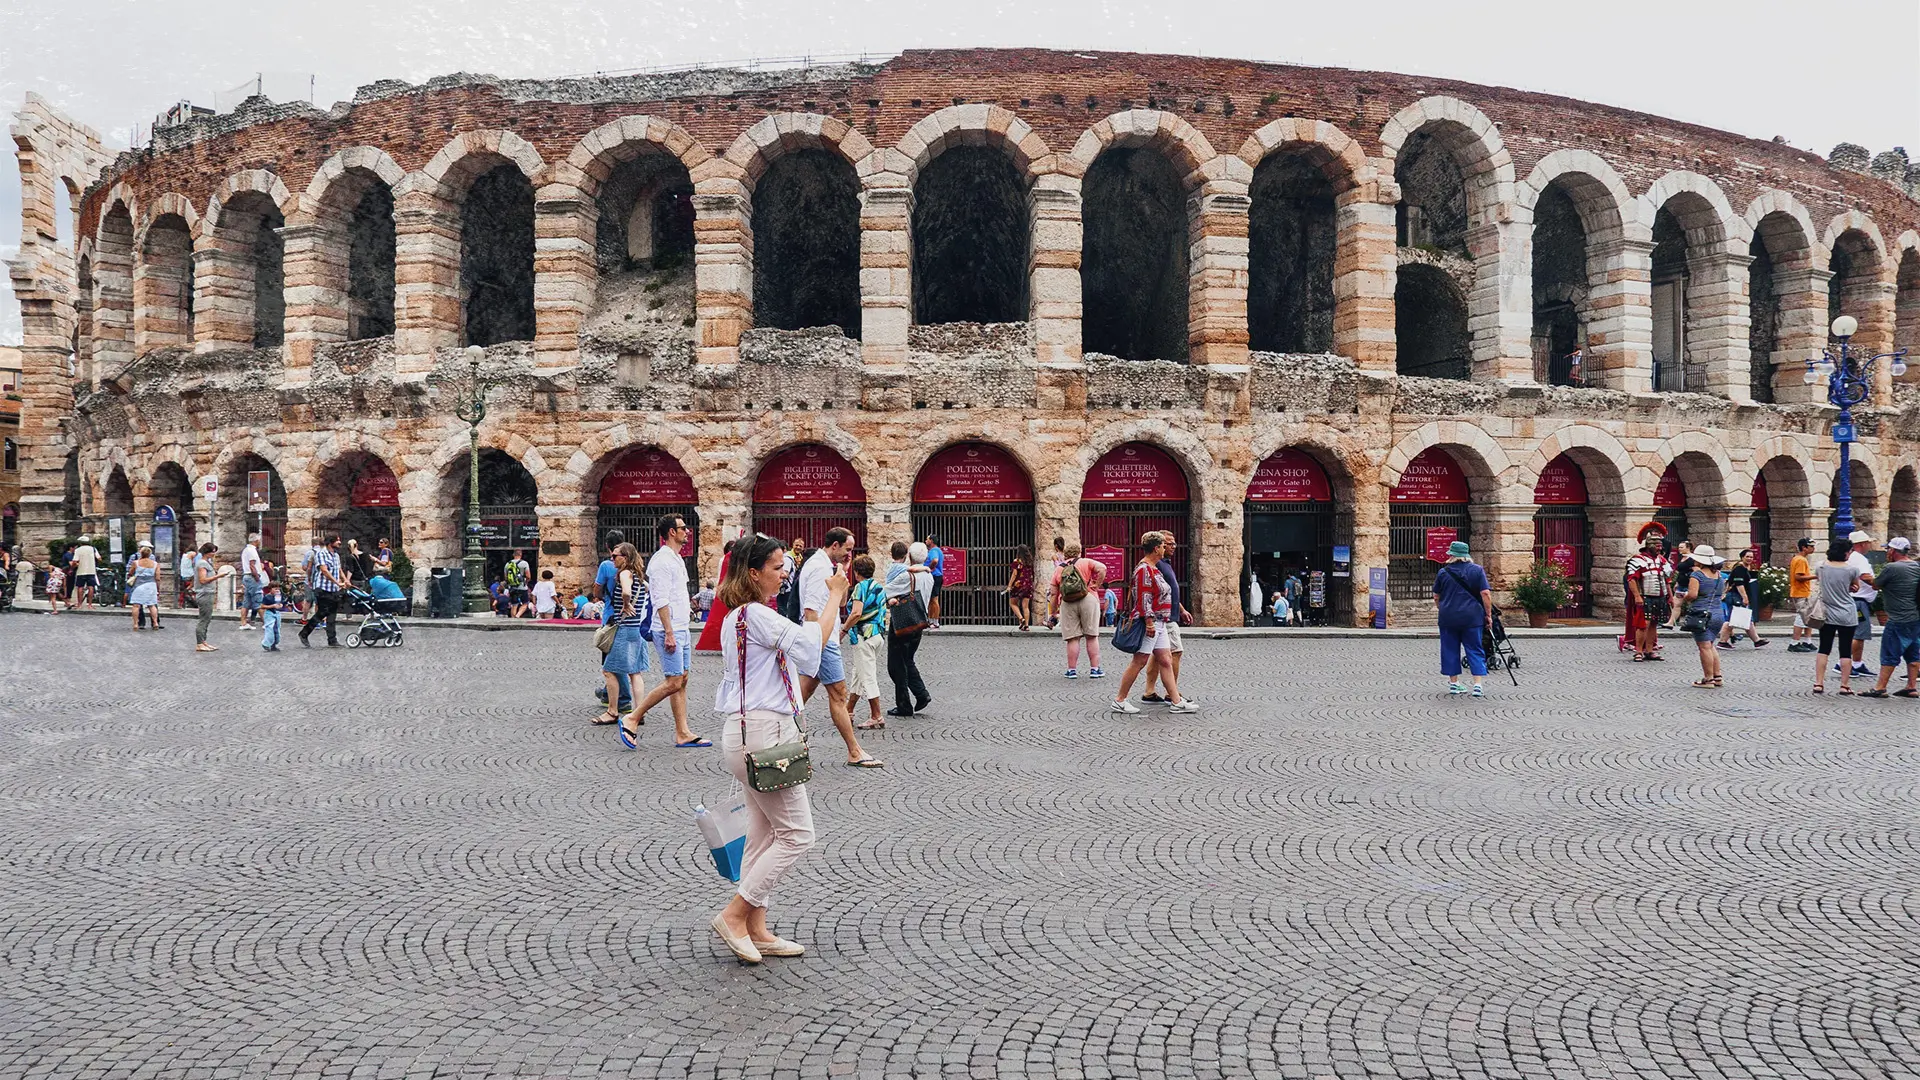 View of the Verona's Roman Arena, an ancient amphitheater in Italy